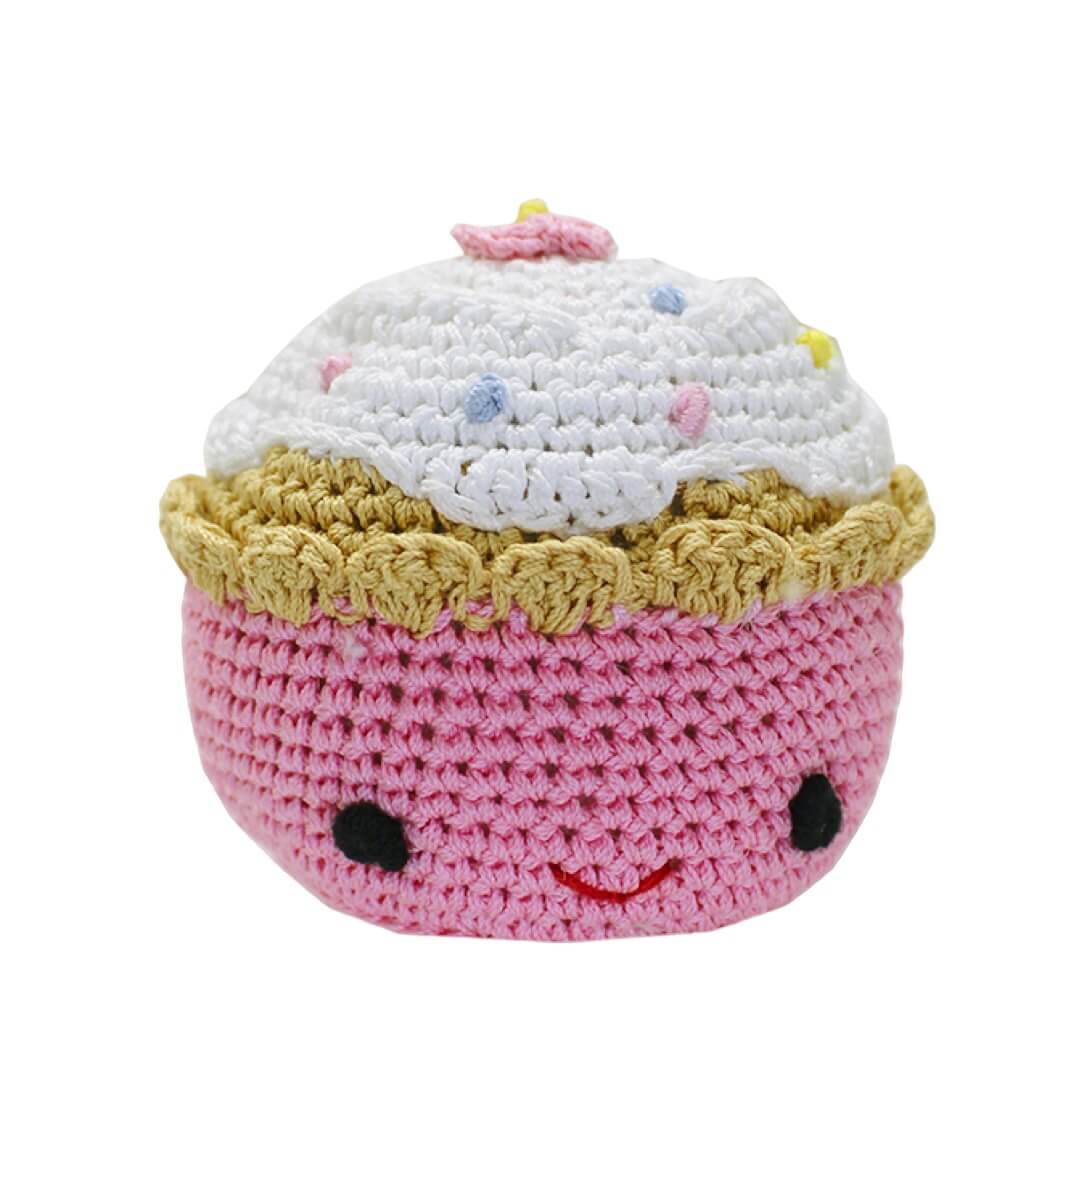 Knit Knacks &quot;Purrdy the Pink Cupcake&quot; handmade organic cotton dog toy. Pink anthropomorphic cupcake with a smiling face, and white frosting with sprinkles on its head.